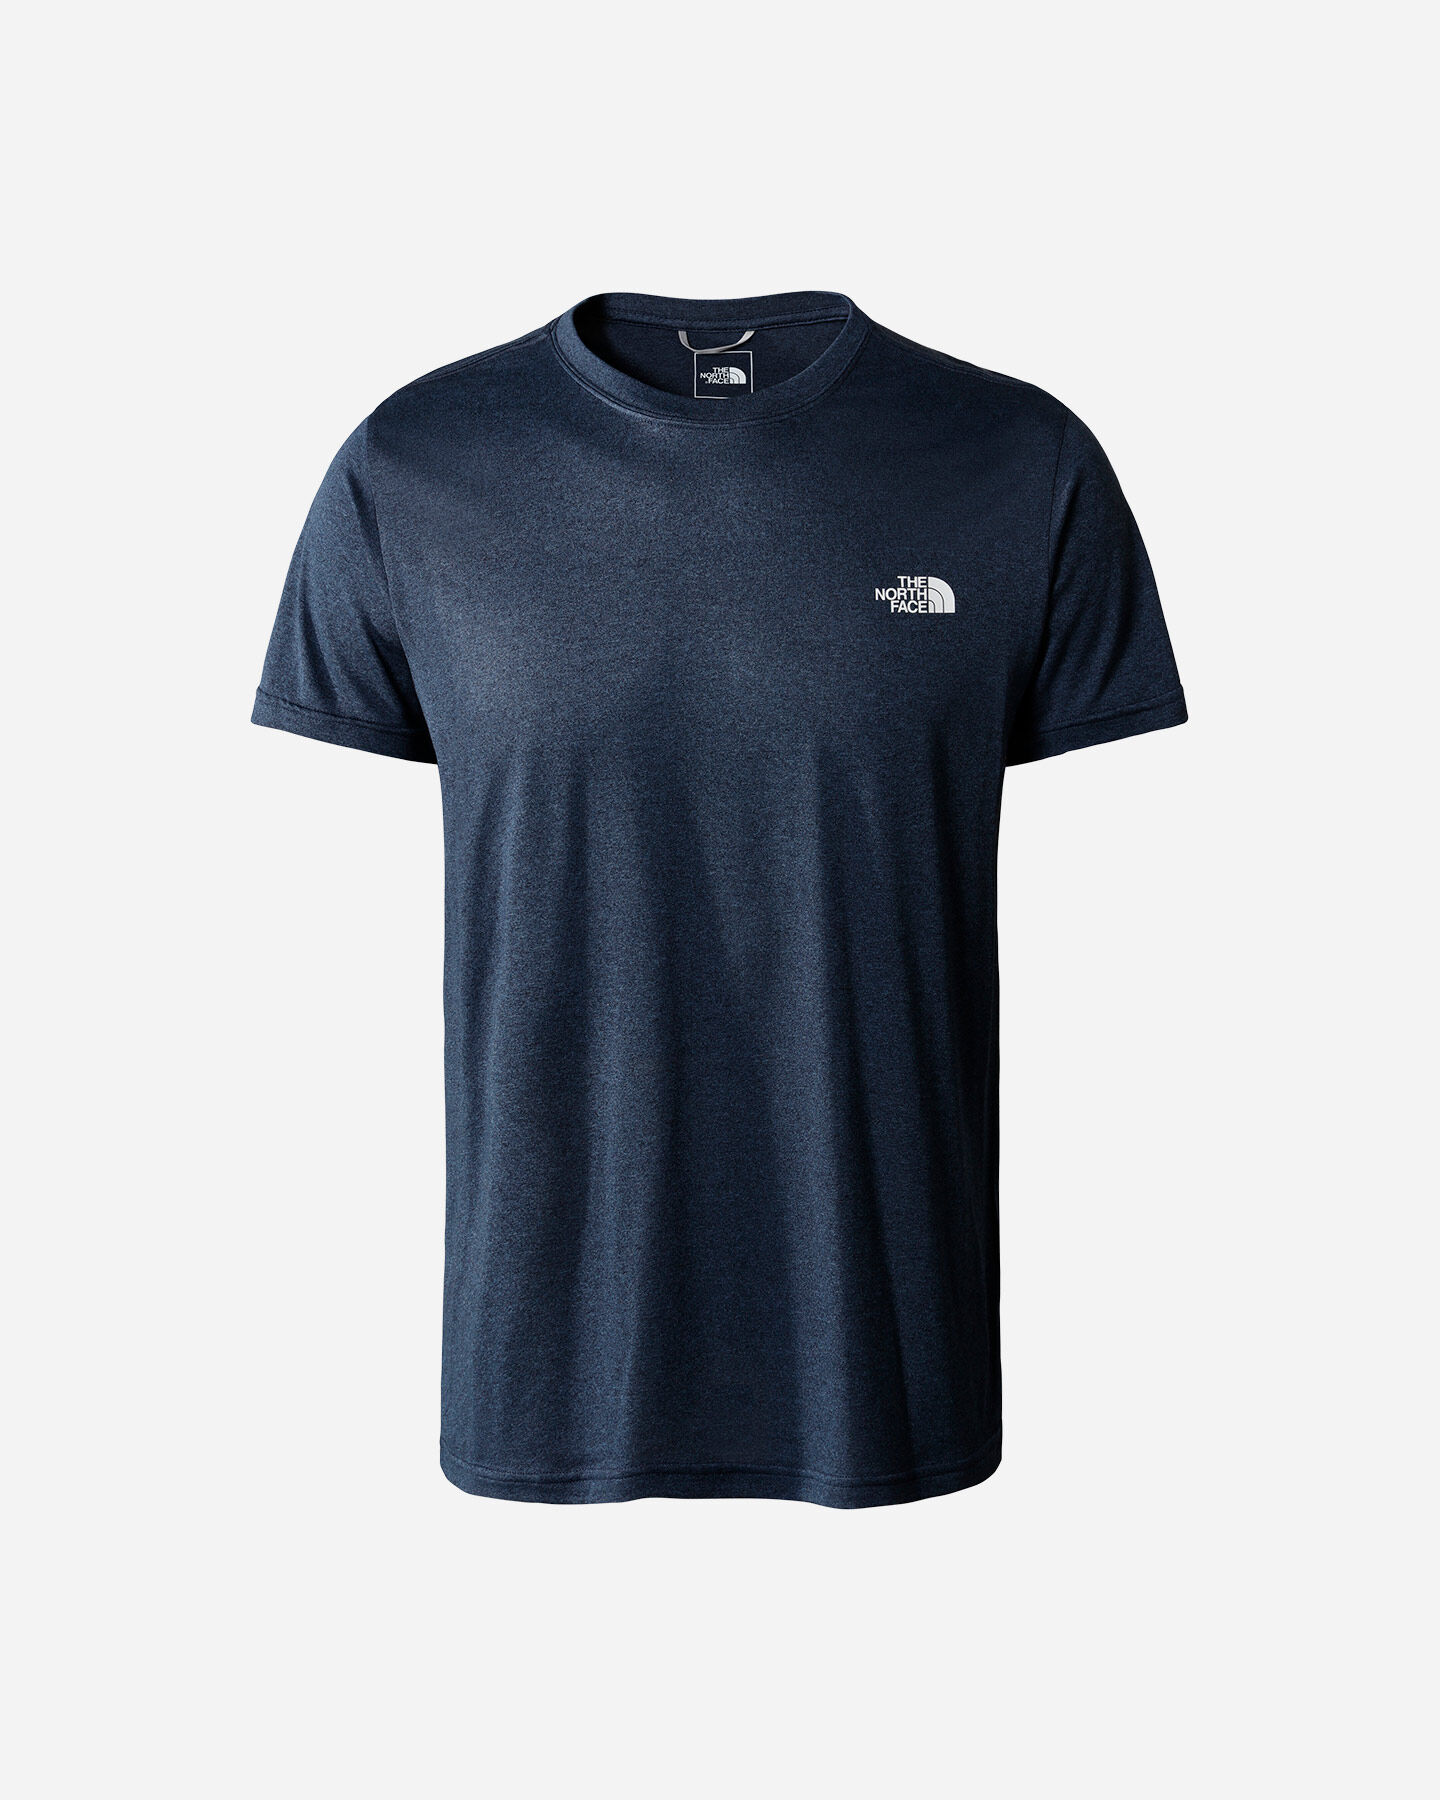  T-Shirt THE NORTH FACE REAXION AMP M S5535667|HKW|S scatto 0